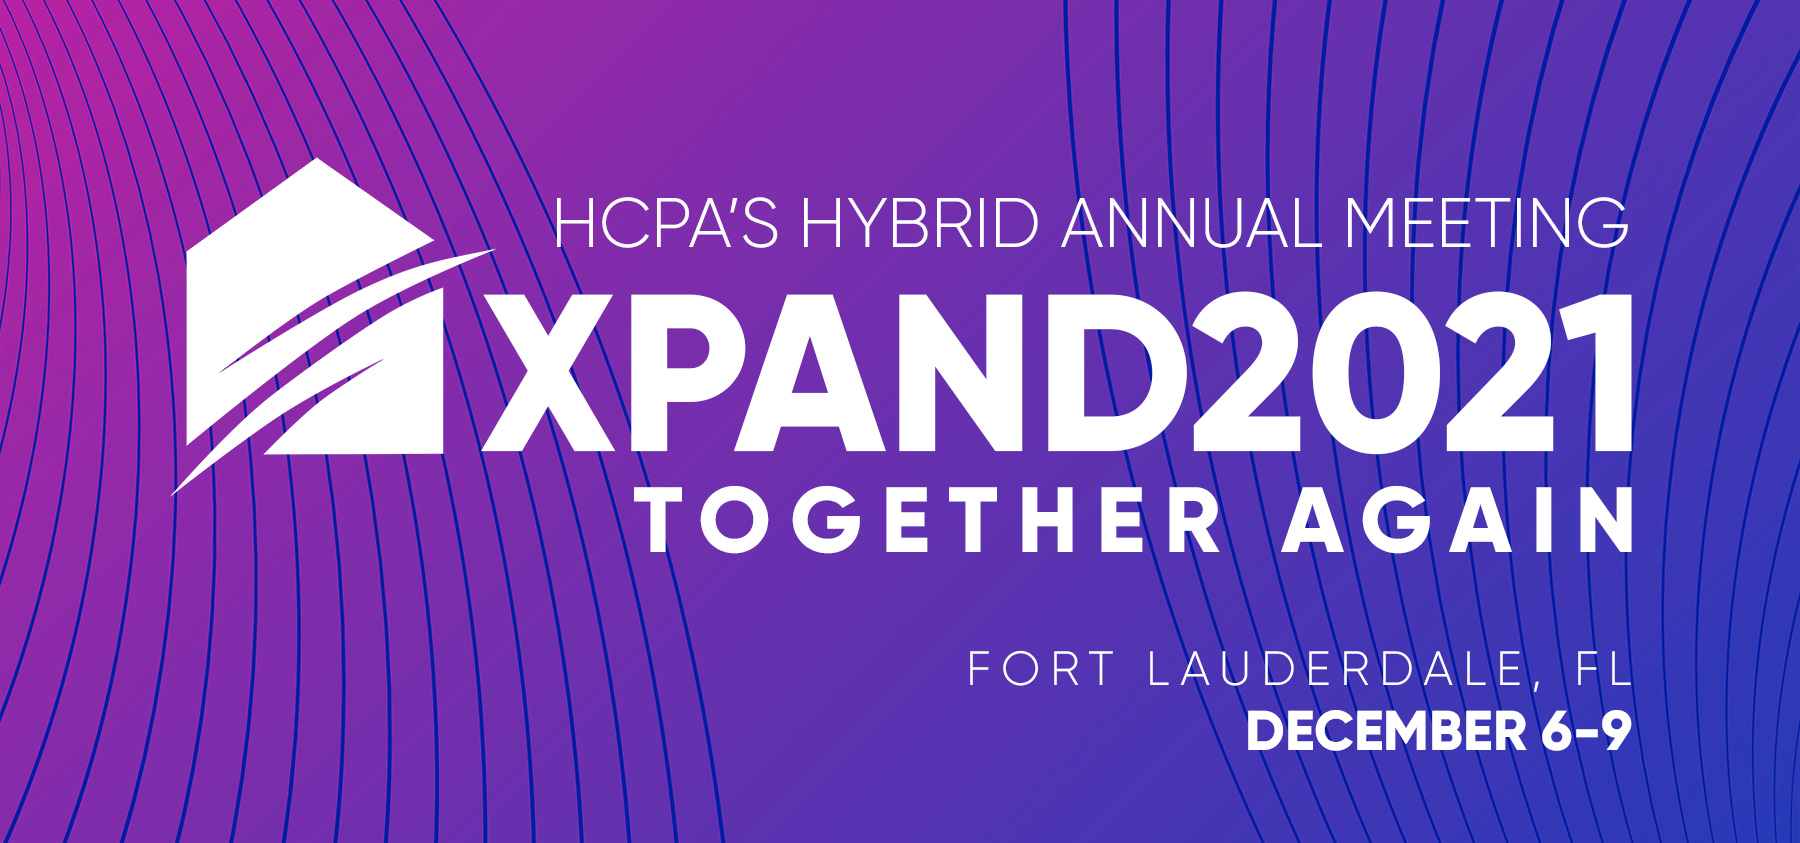 HCPA’s Hybrid Annual Meeting will Be Held in Florida in December 